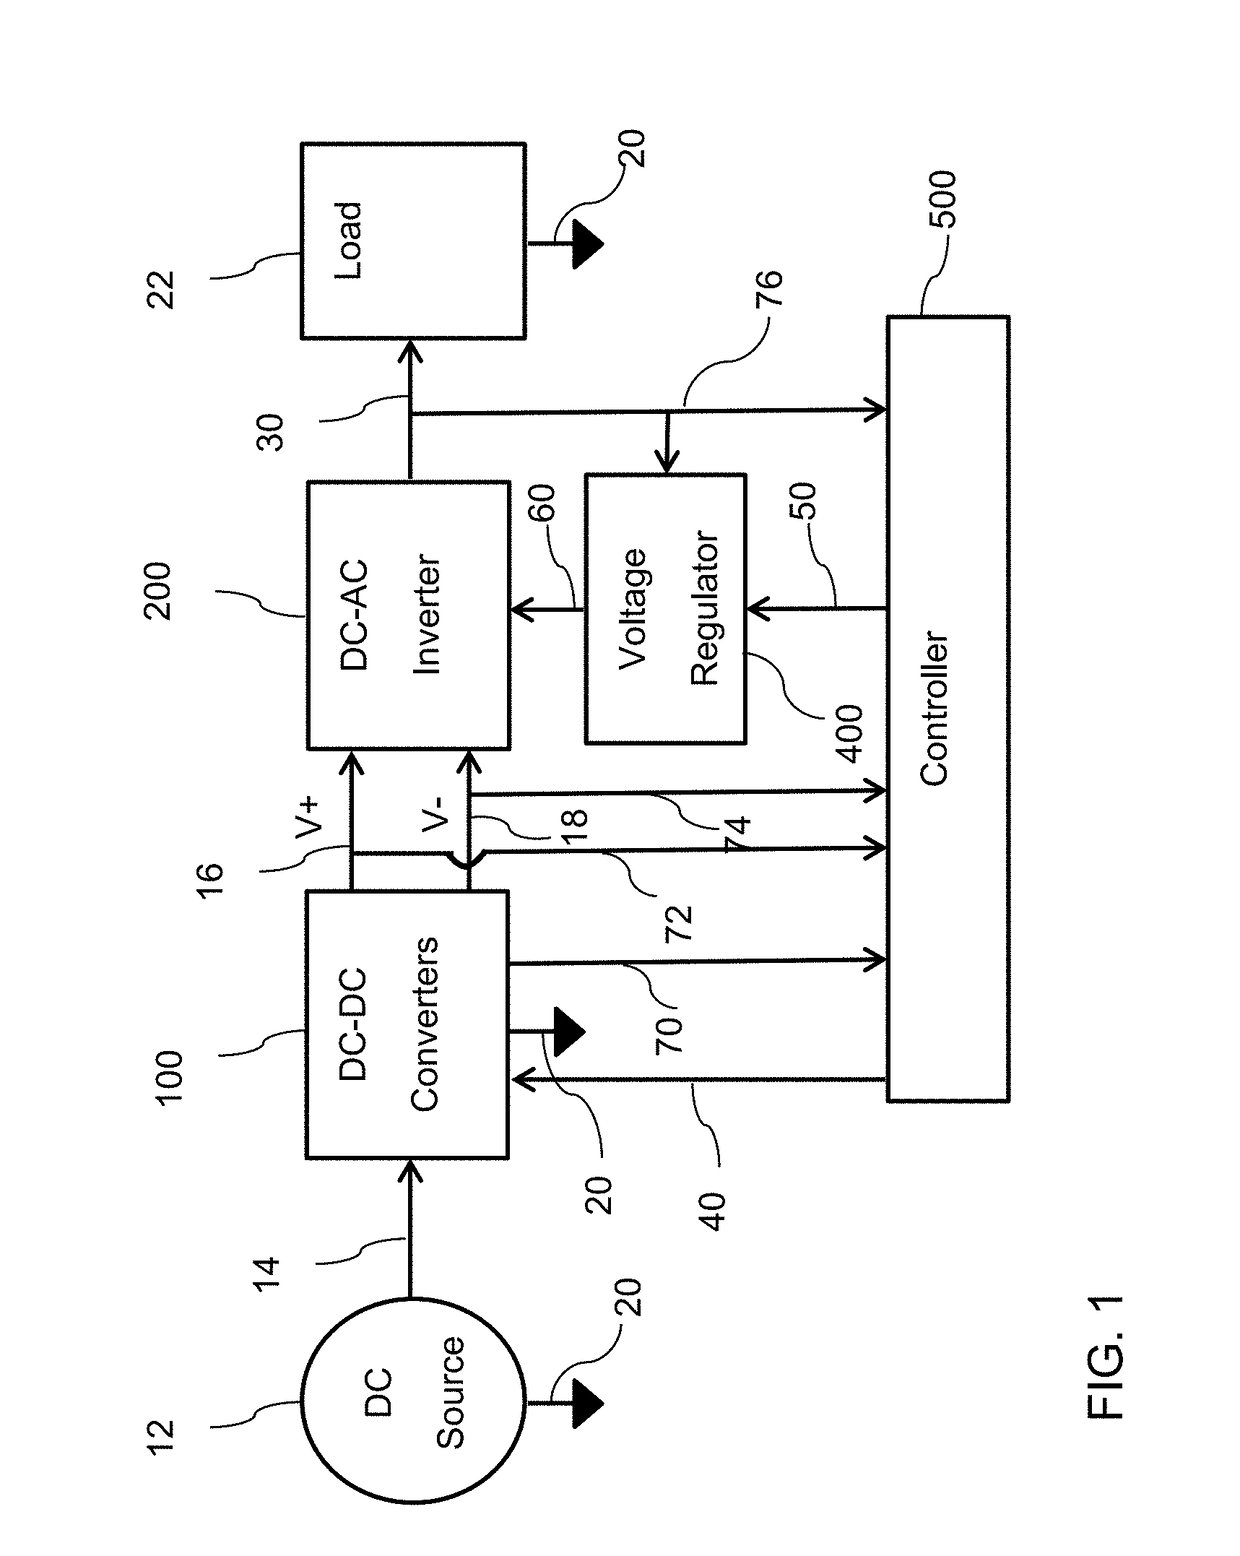 Method for generating highly efficient harmonics free DC to ac inverters